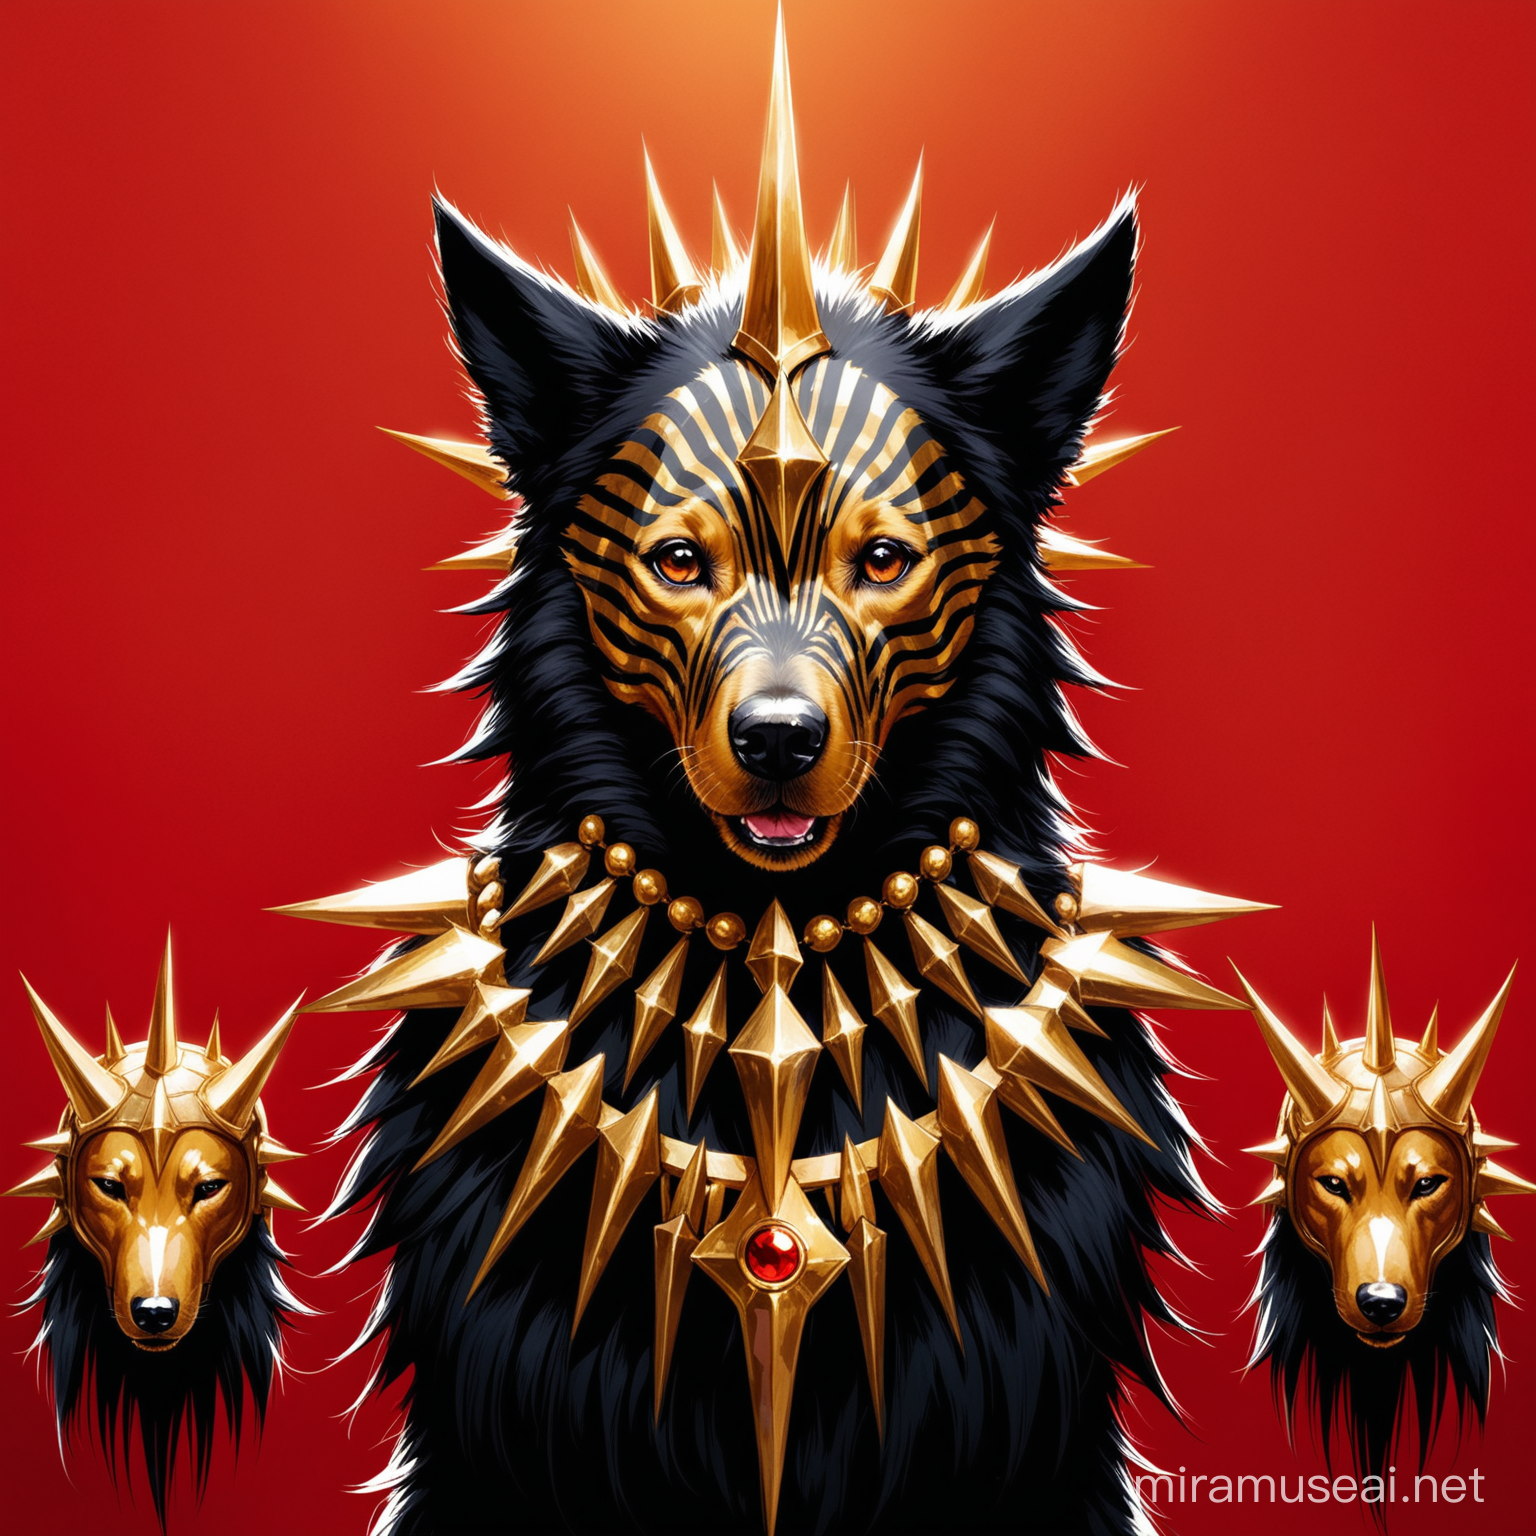 A dog with gold skin and black stripes and three black Dathormir spikes on its head against a background of red colour and motiffs